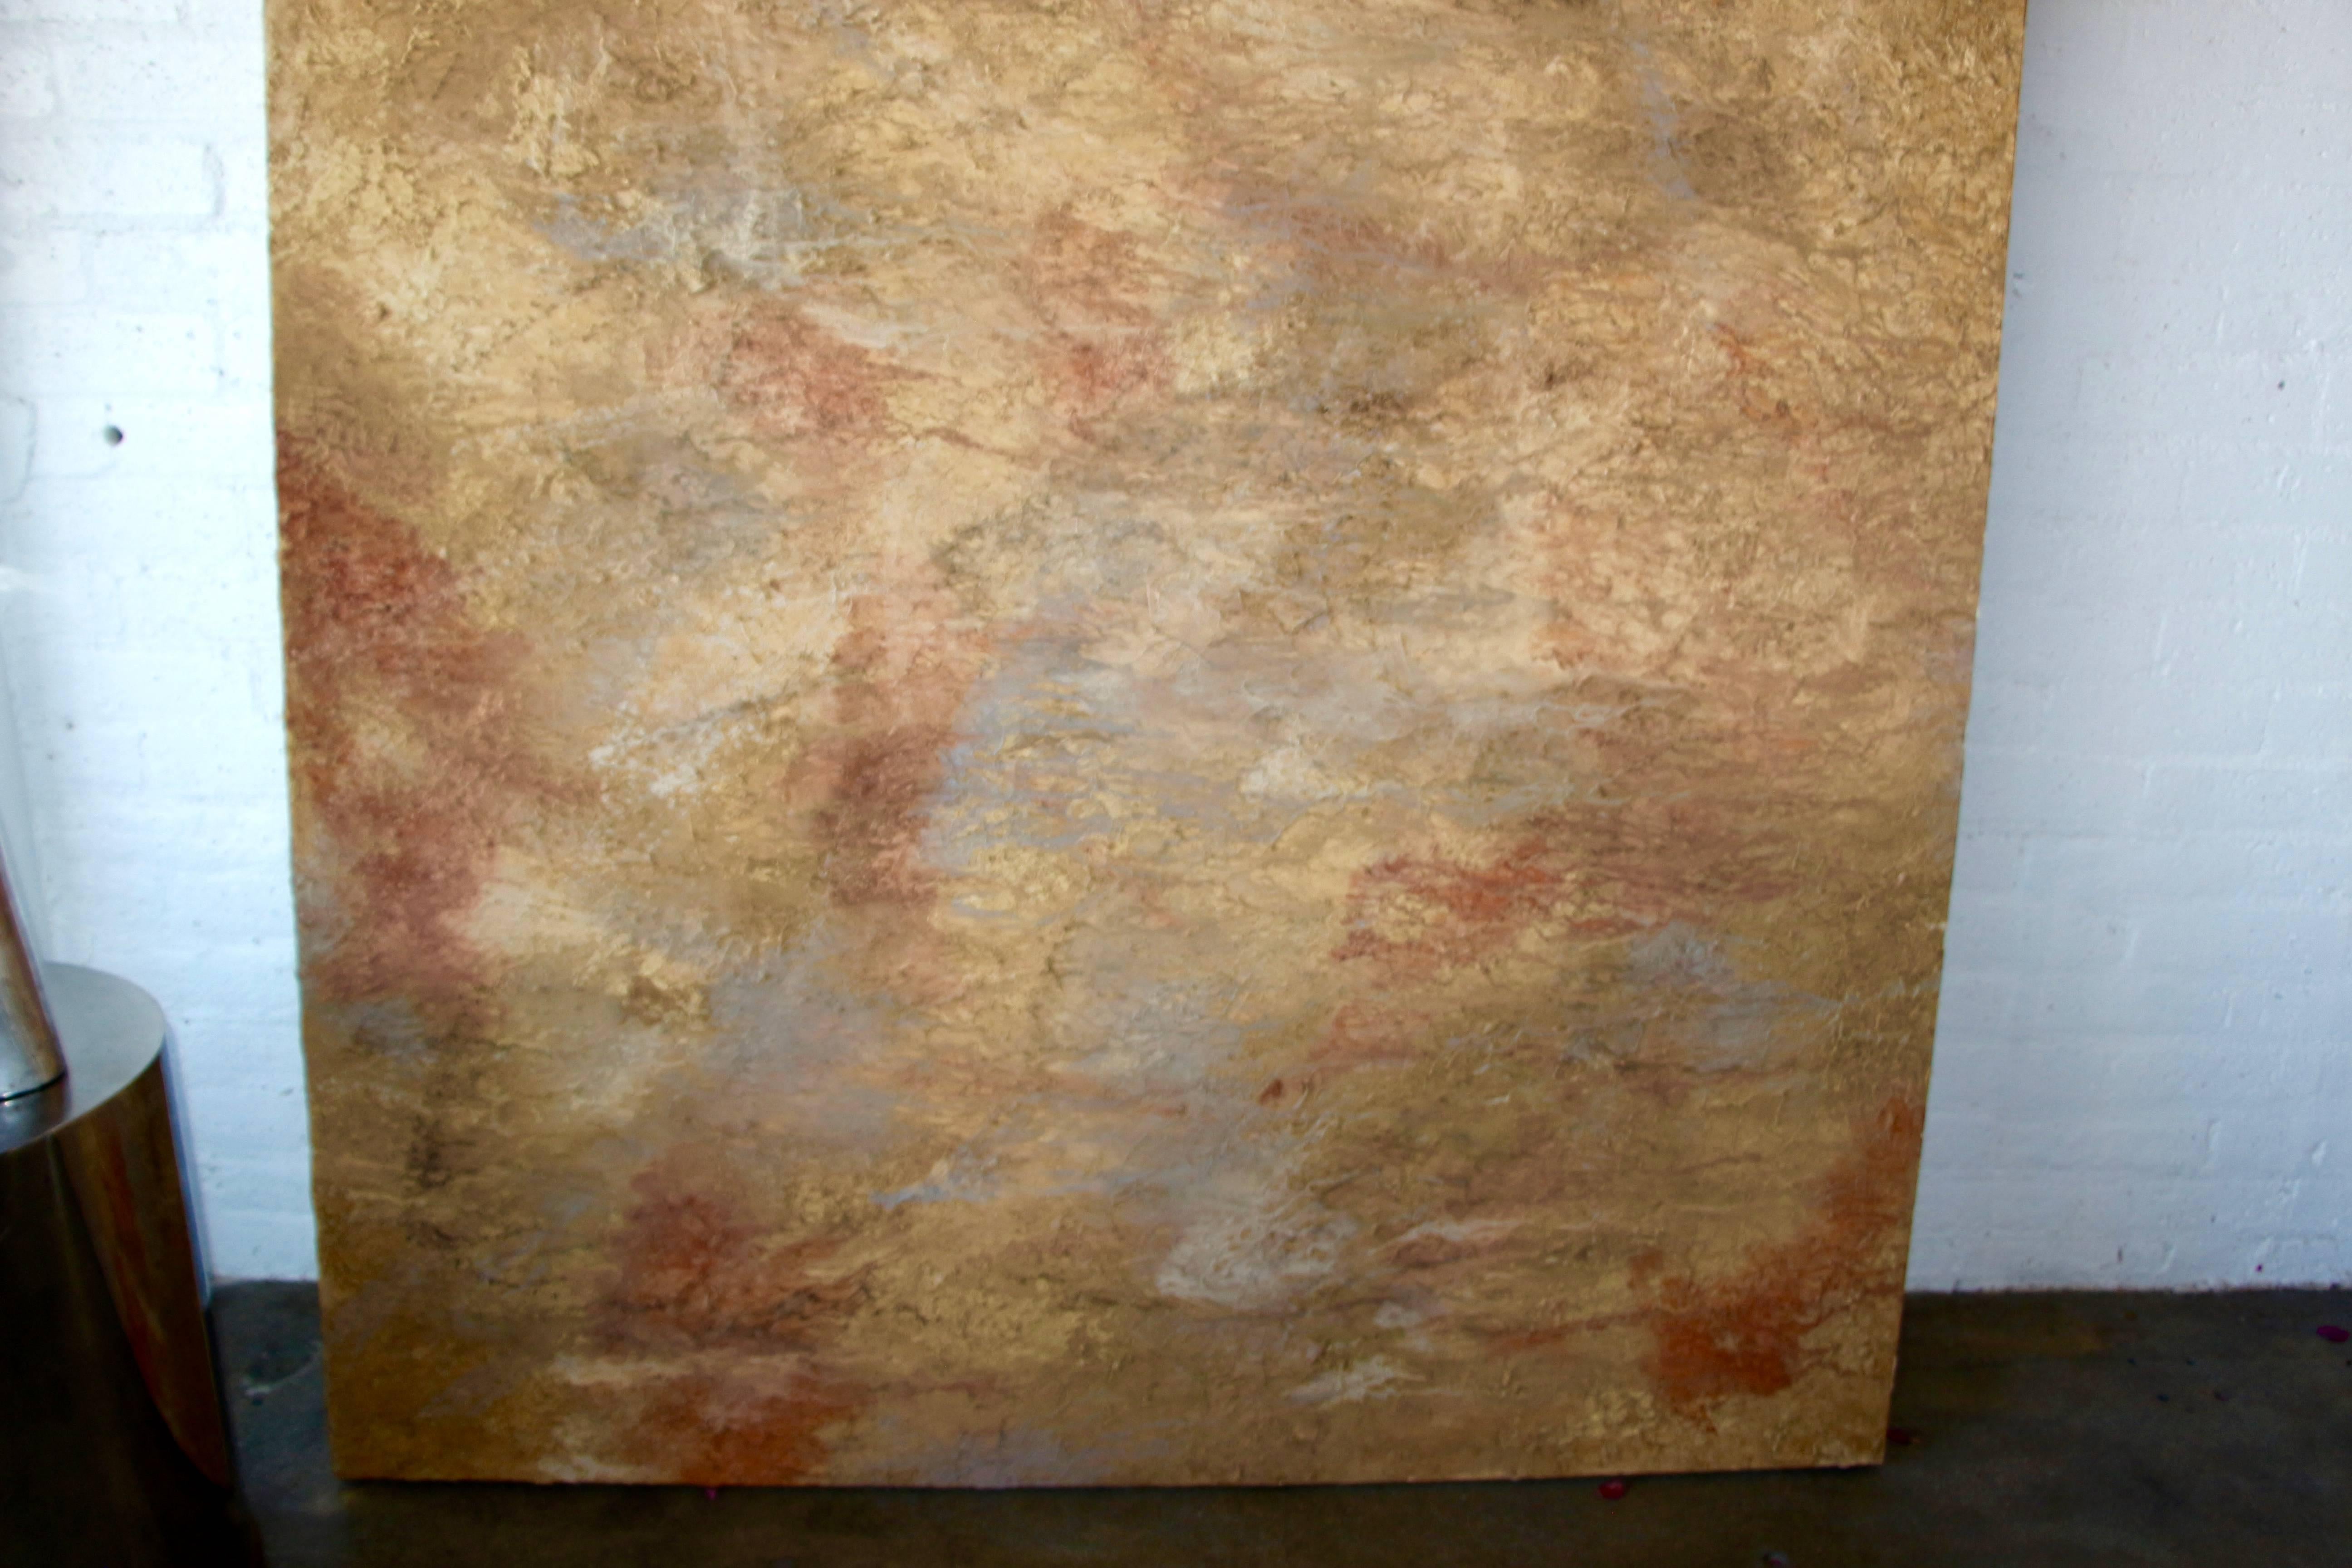 Untited - Brown Abstract Painting by Unknown